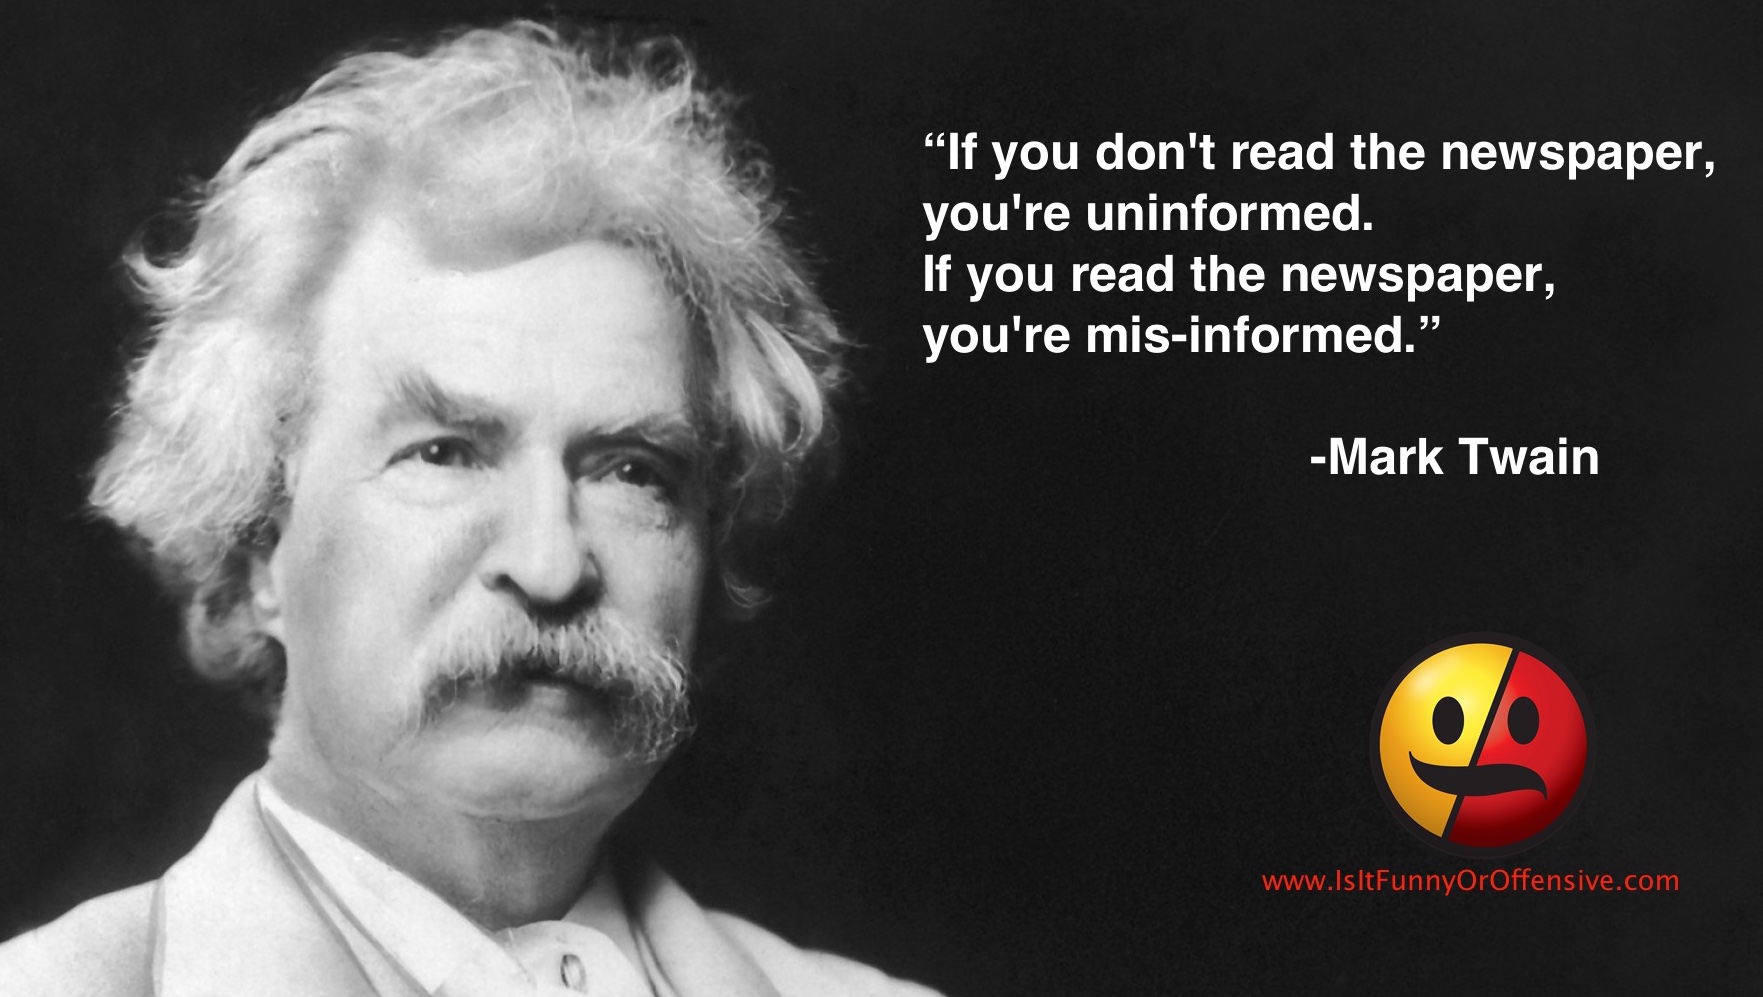 Mark Twain on News and Information